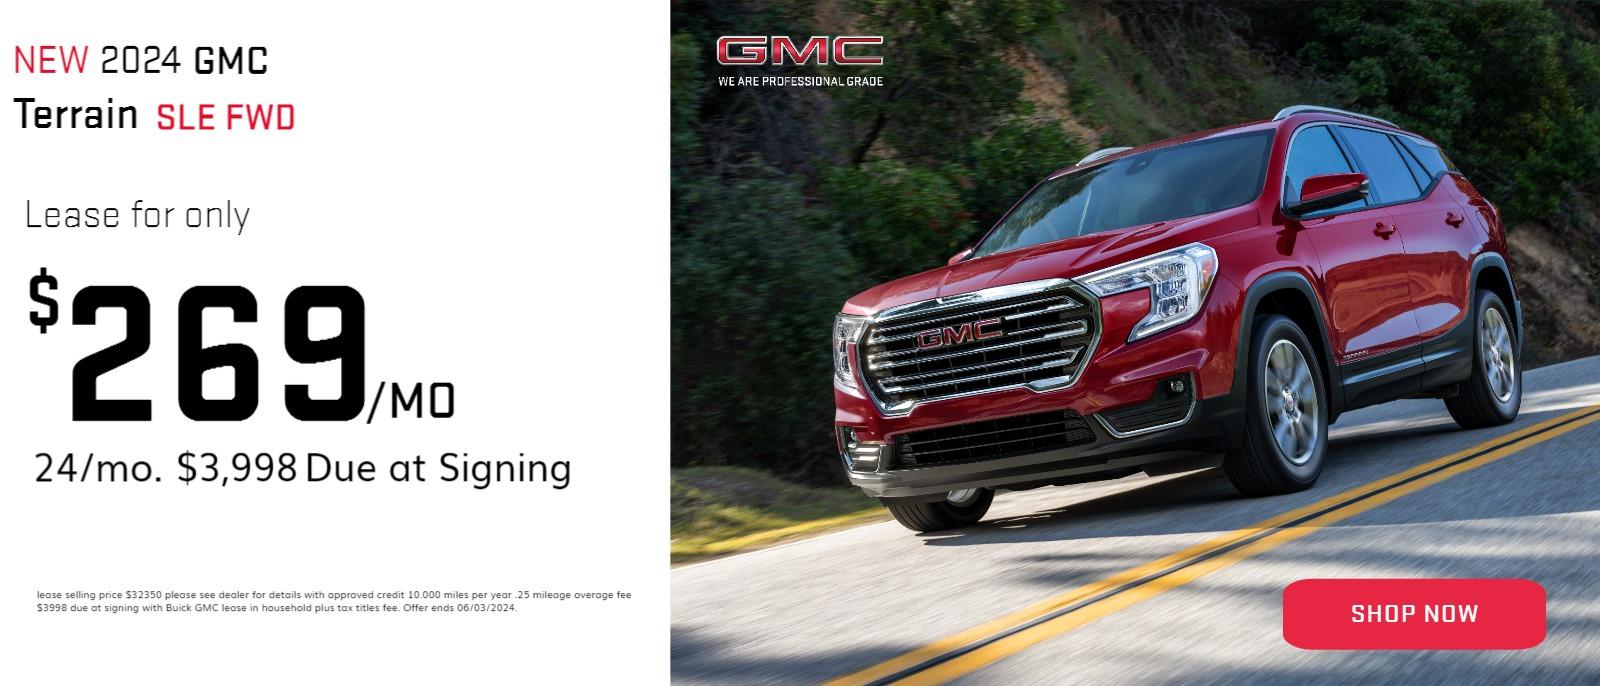 NEW 2024 GMC Terrain SLE FWD Lease for only $269/M 24/mo. $3,998 Due at Signing lease selling price $32350 please see dealer for details with approved credit 10.000 miles per year 25 mileage overage feel $3998 due at signing with Buick GMC lease in household plus tax titles fee. Offer ends 06/03/2024.